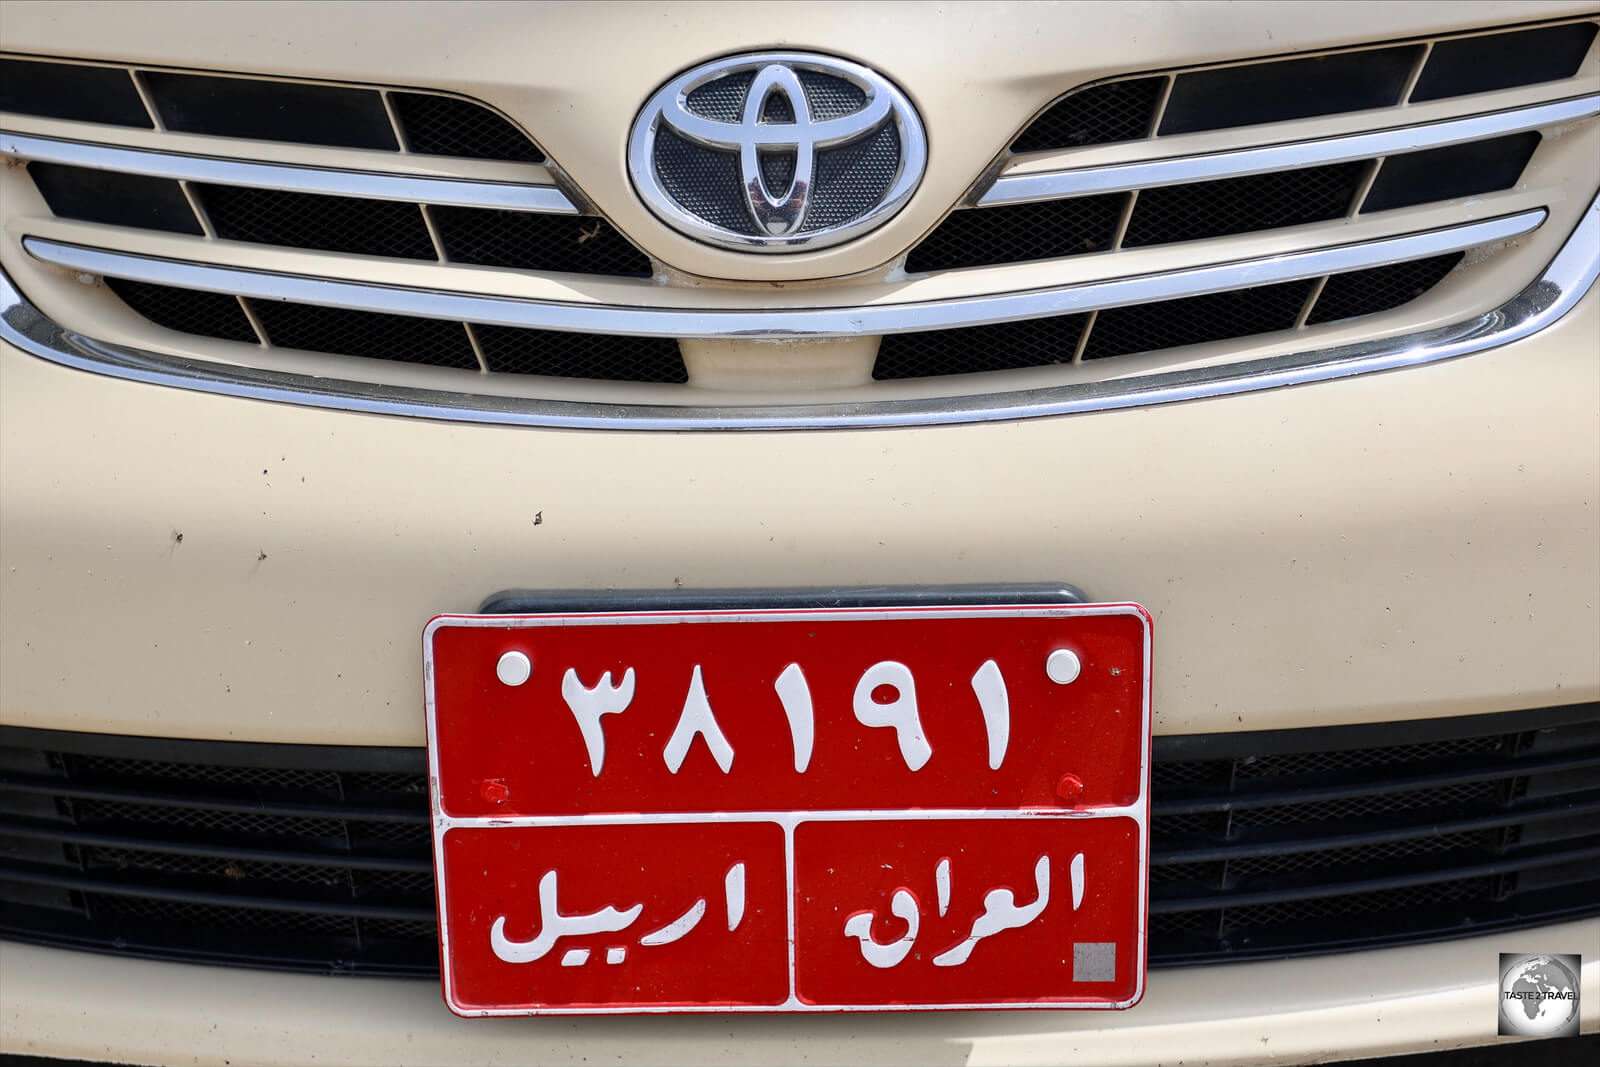 Taxis in Iraq can be identified by their red license plates. 